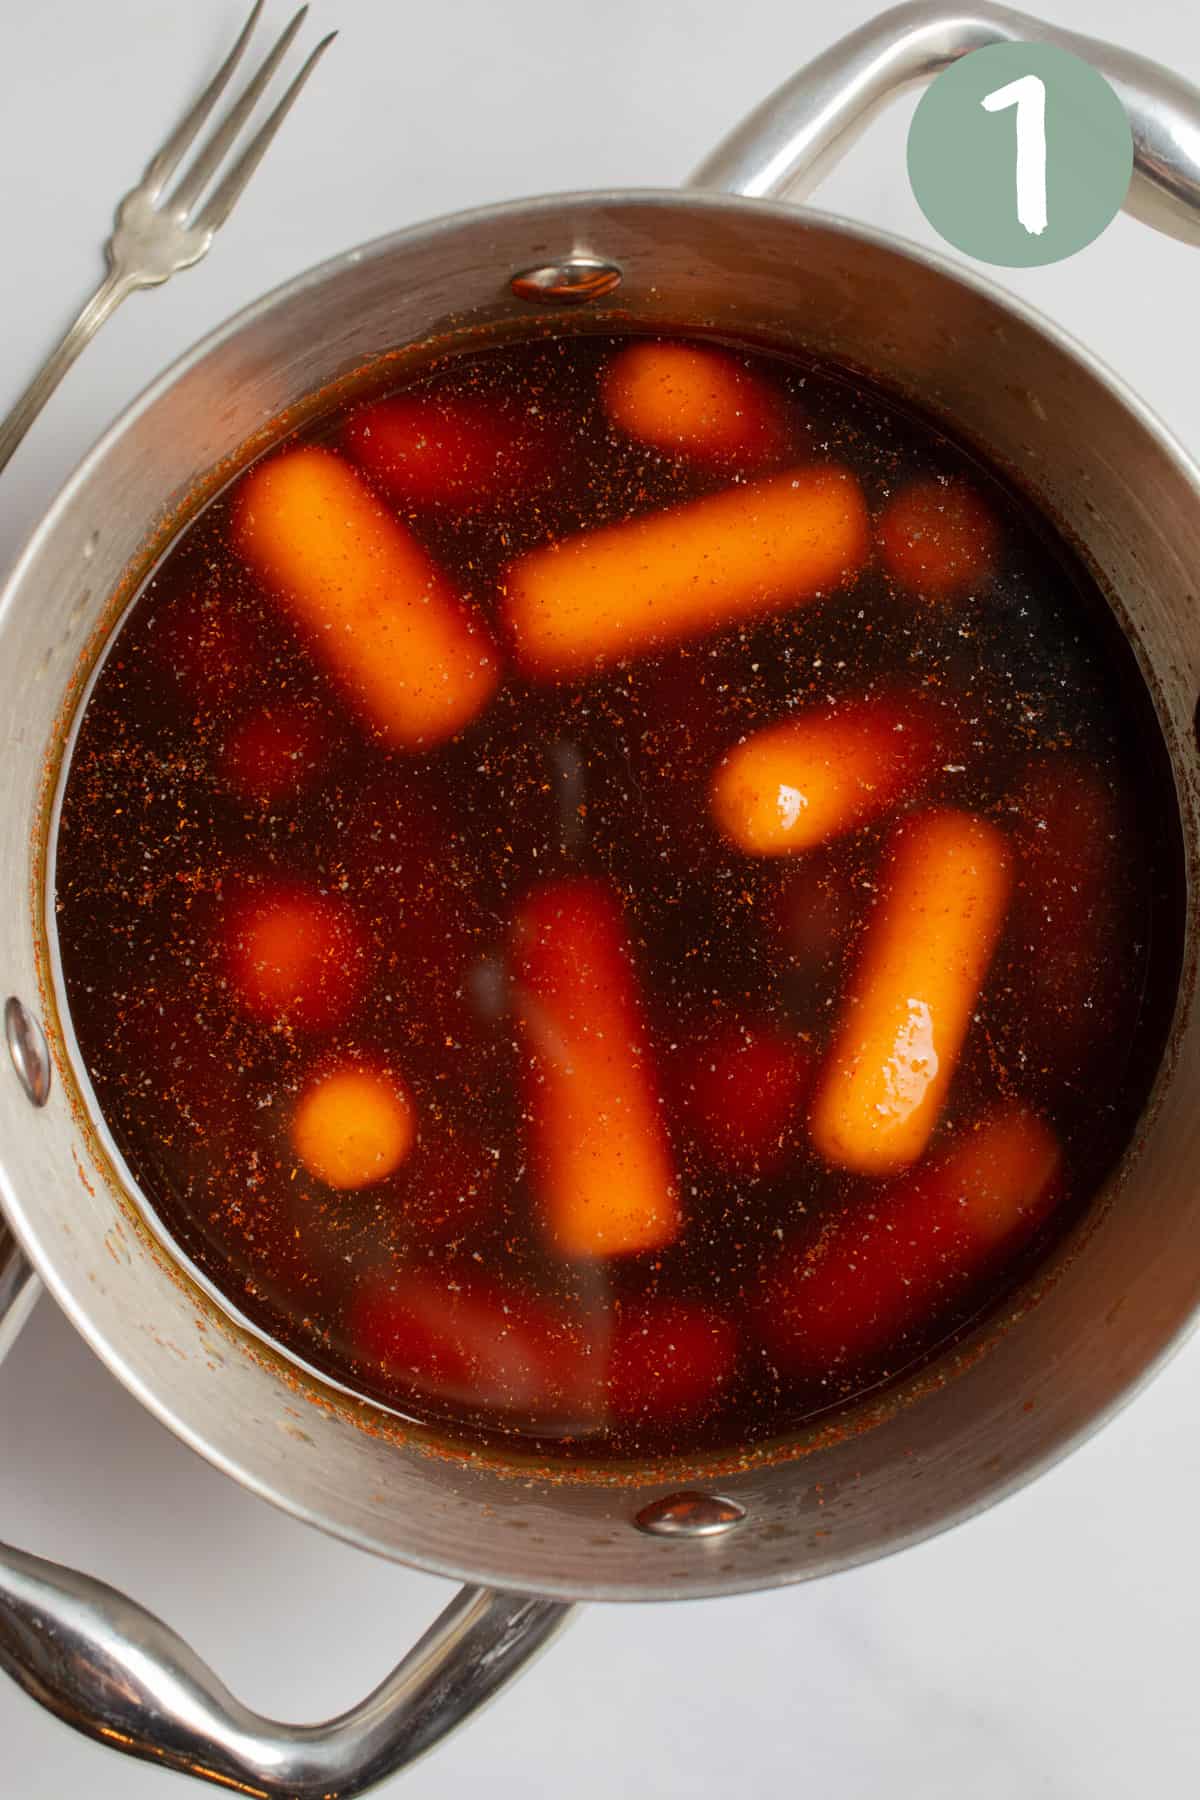 Baby carrots sitting in marinade in a small metal pot with side handles.